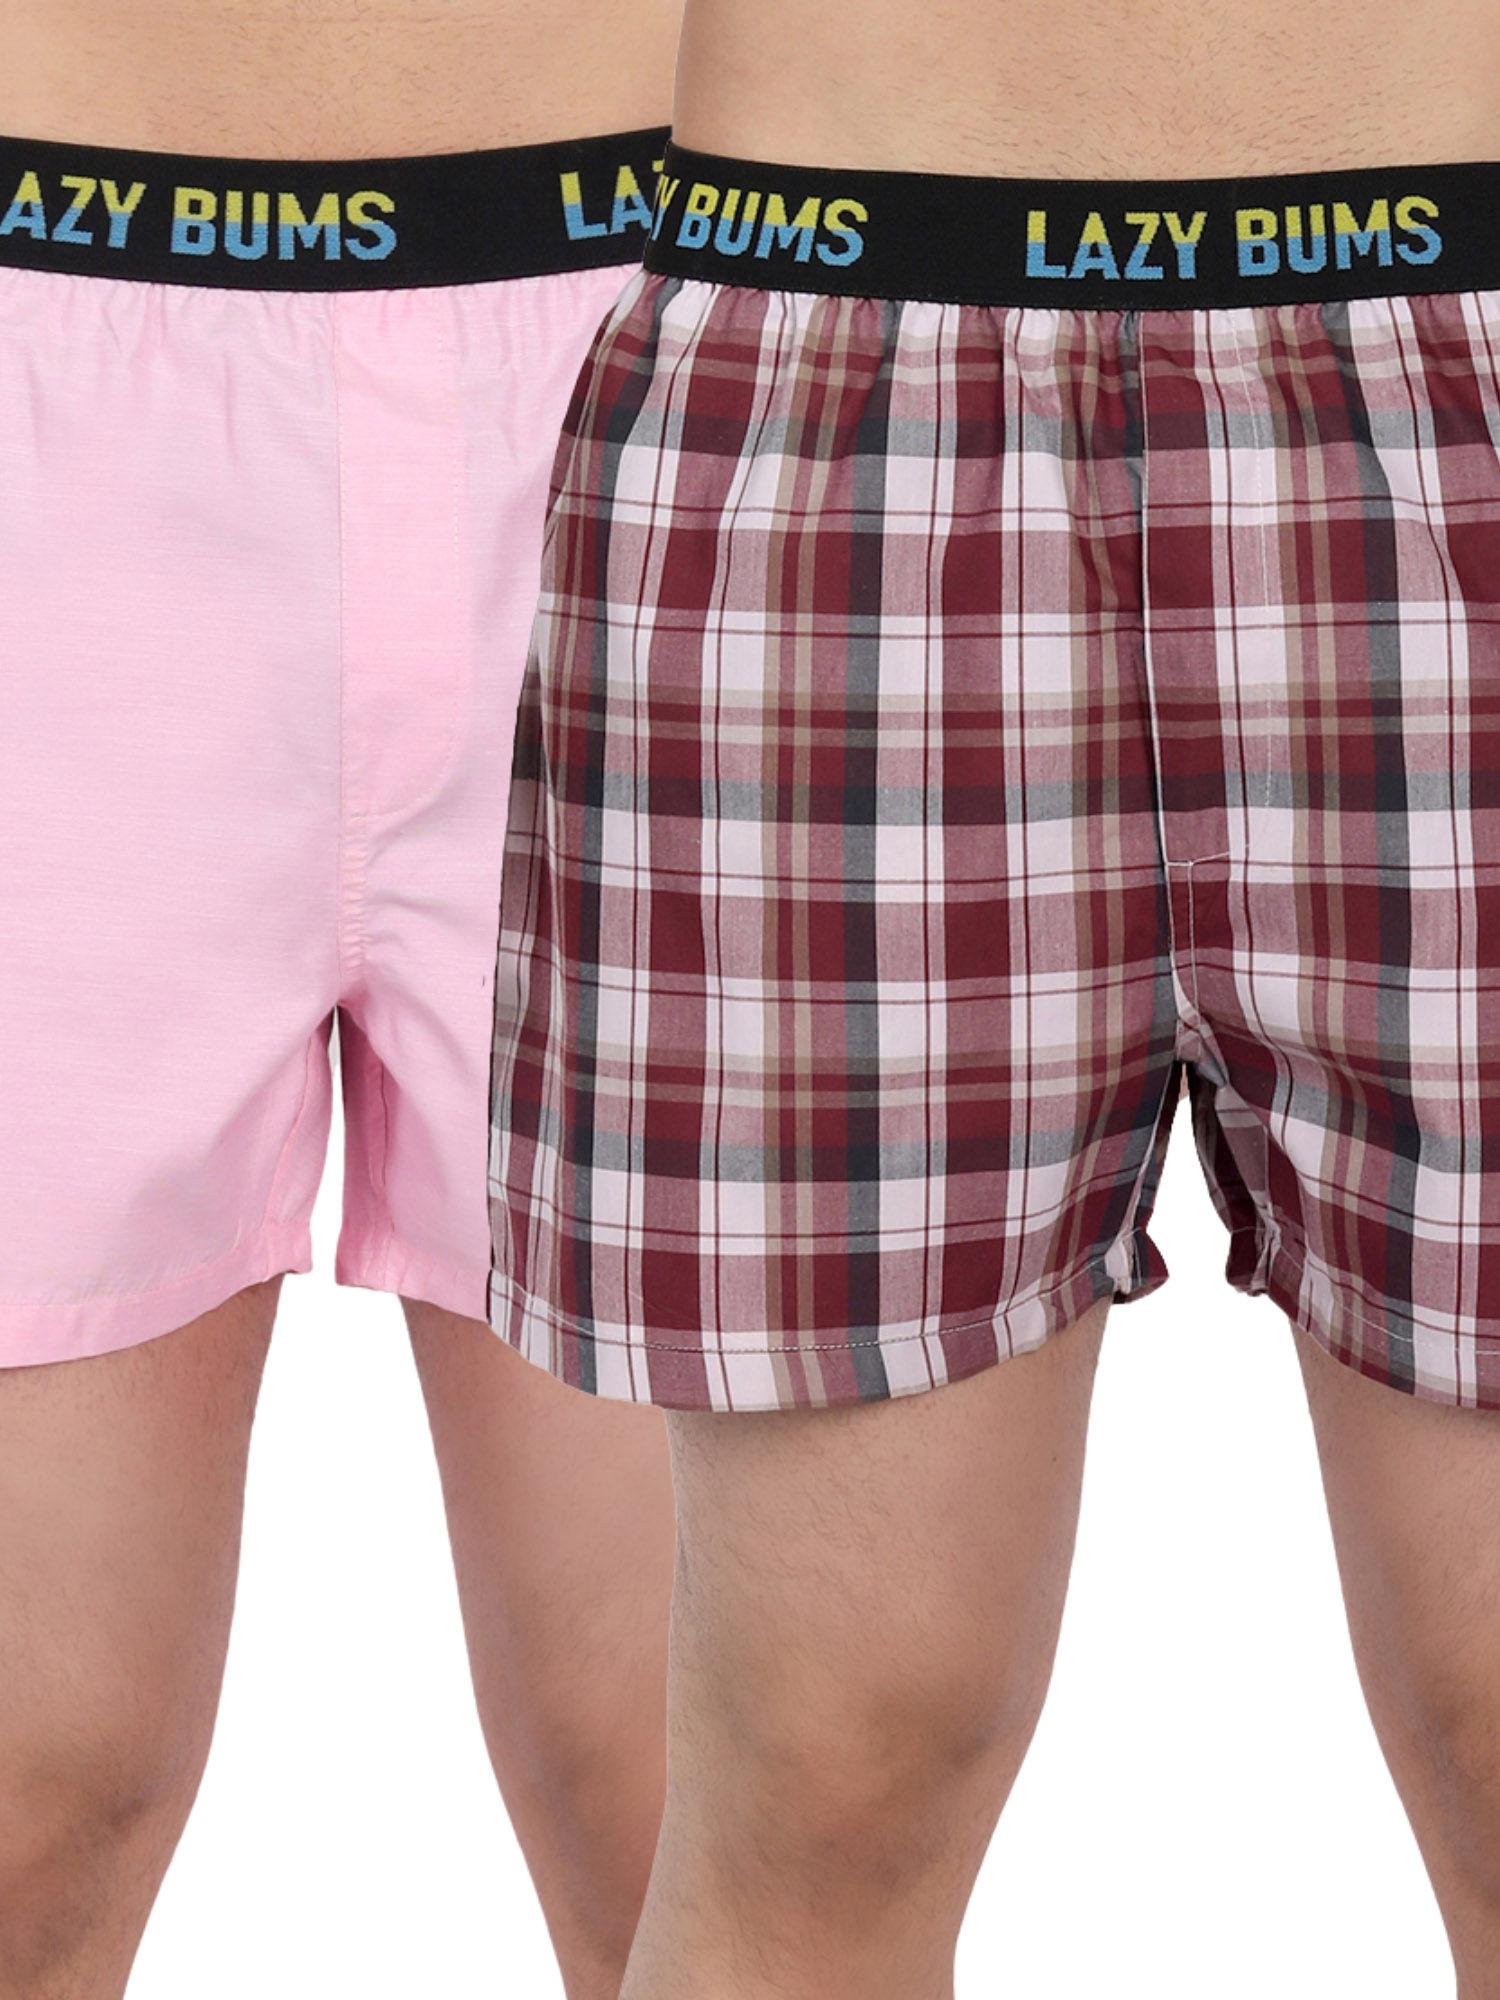 men's combed cotton breeze boxer shorts regular fit boxers (pack of 2)